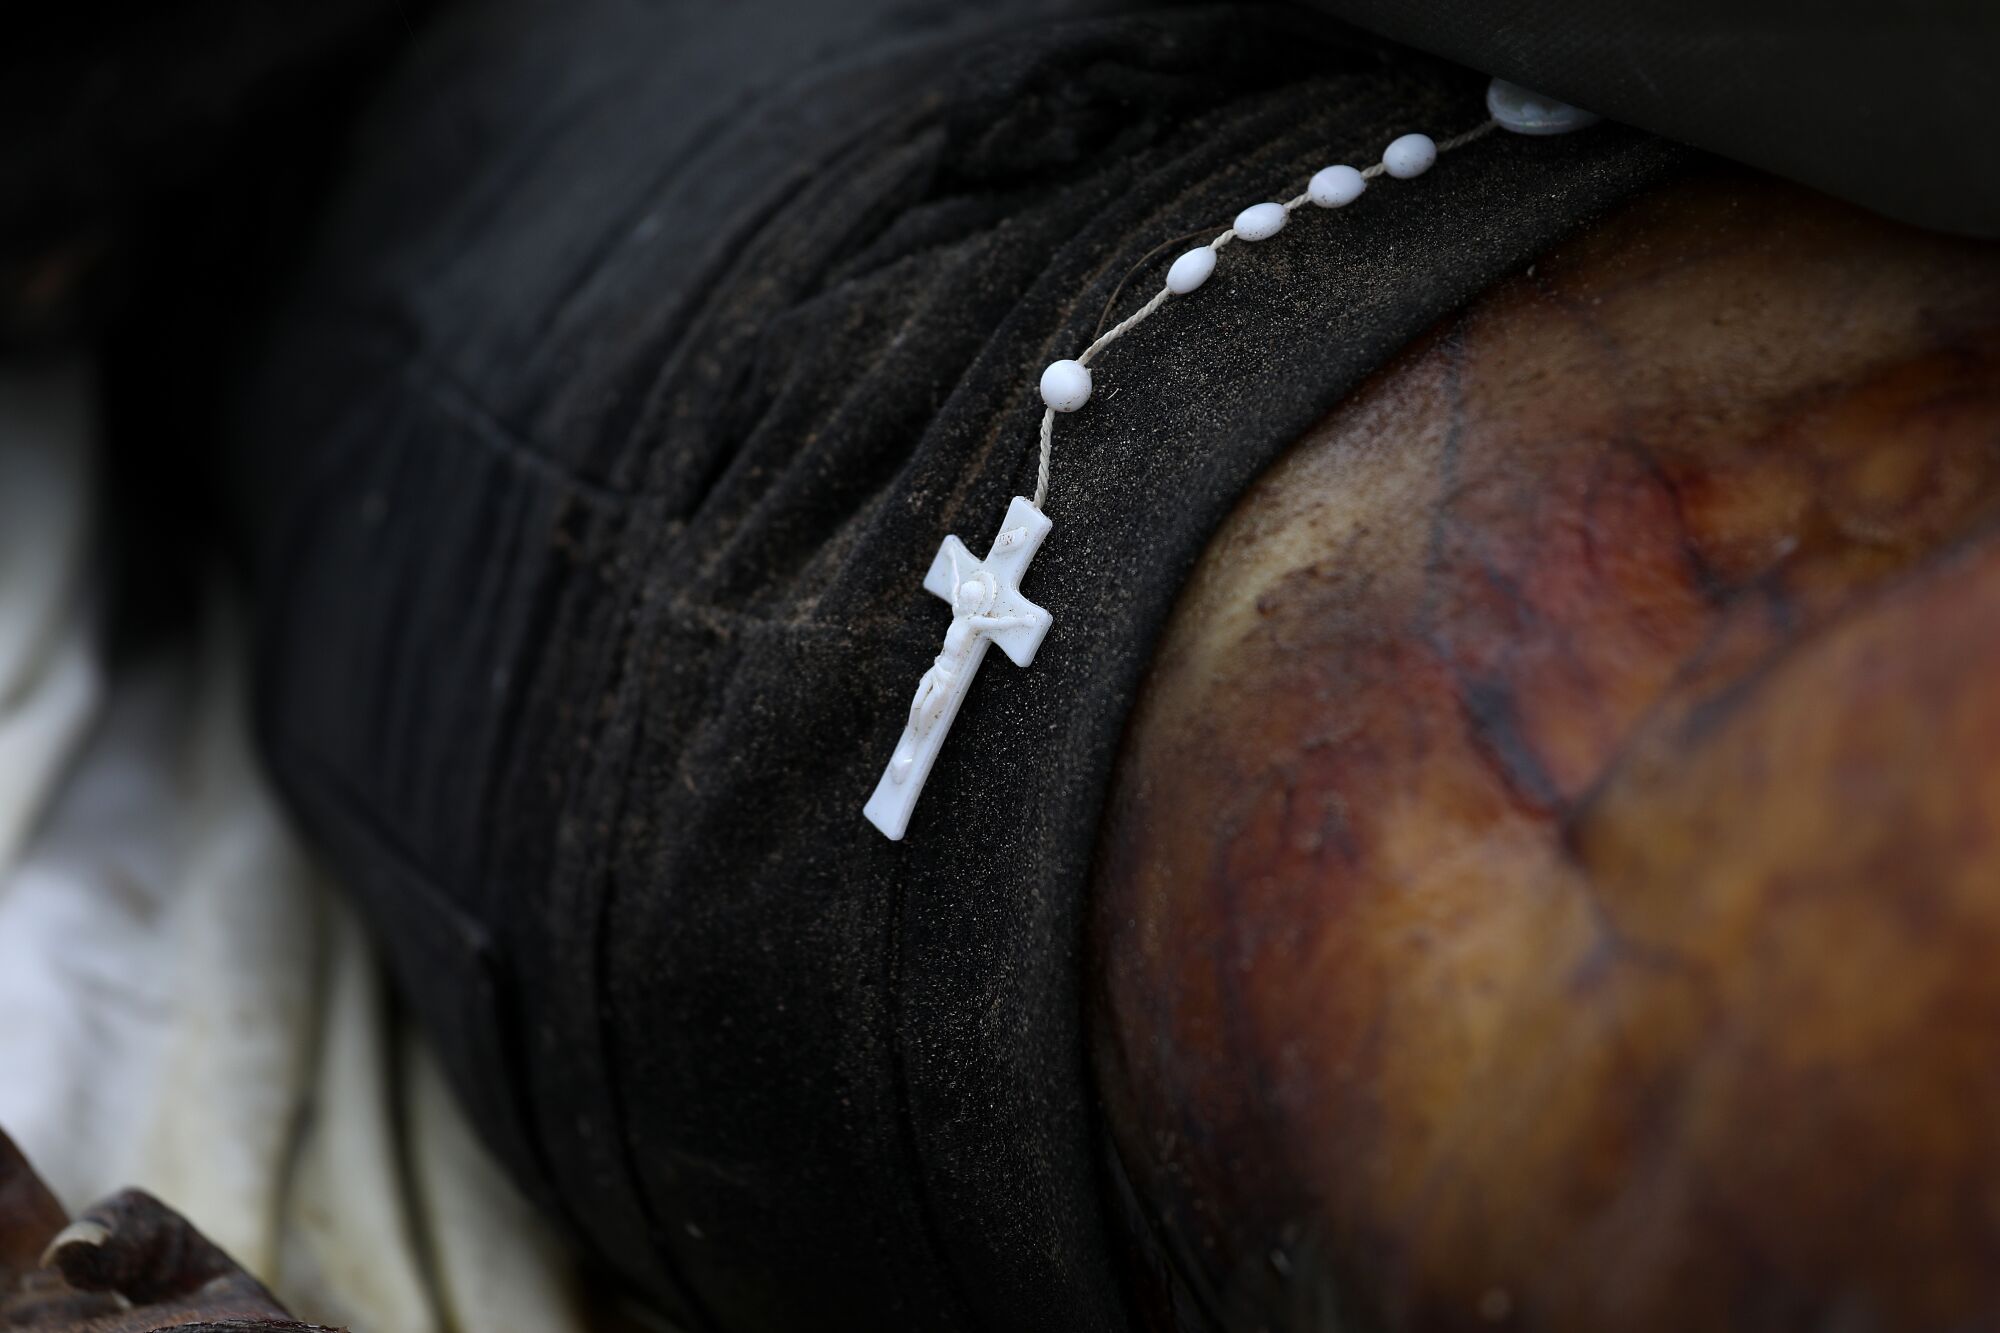 A rosary on a body.